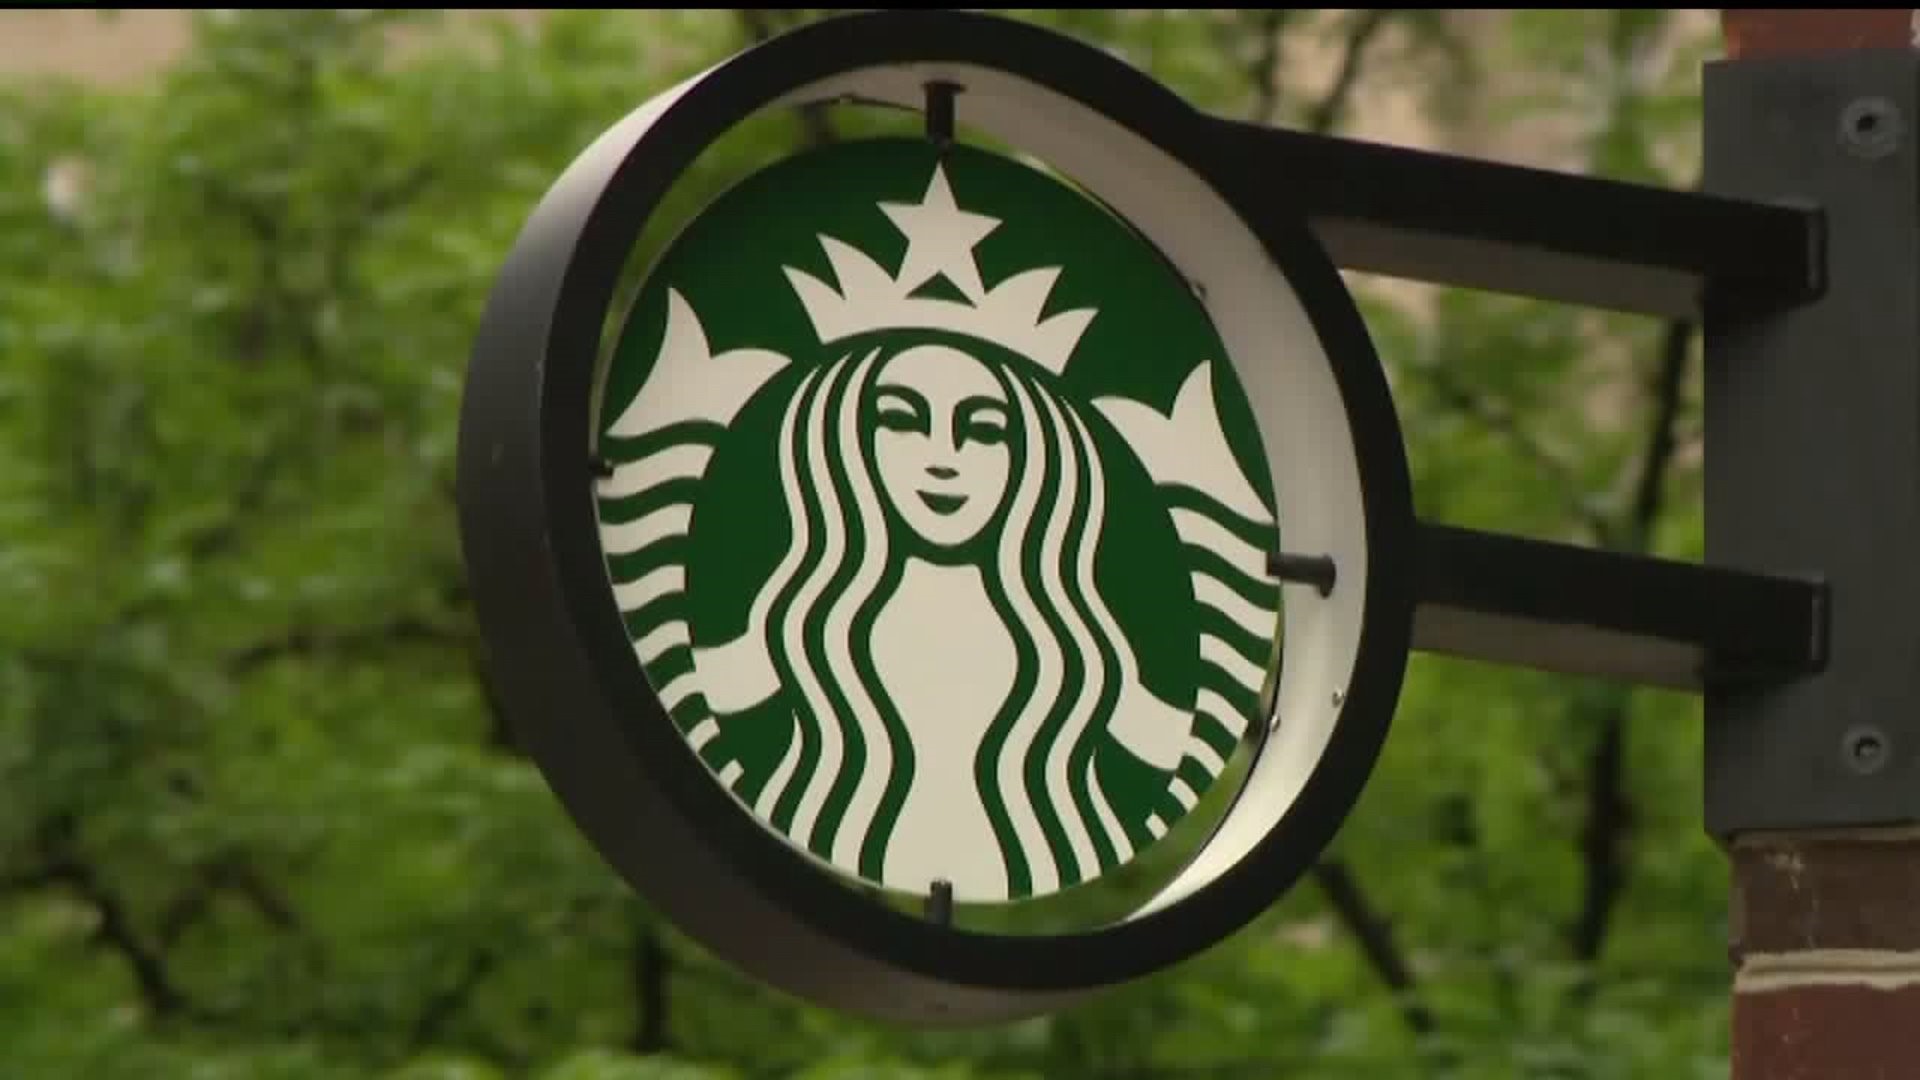 Starbucks closes all locations for training